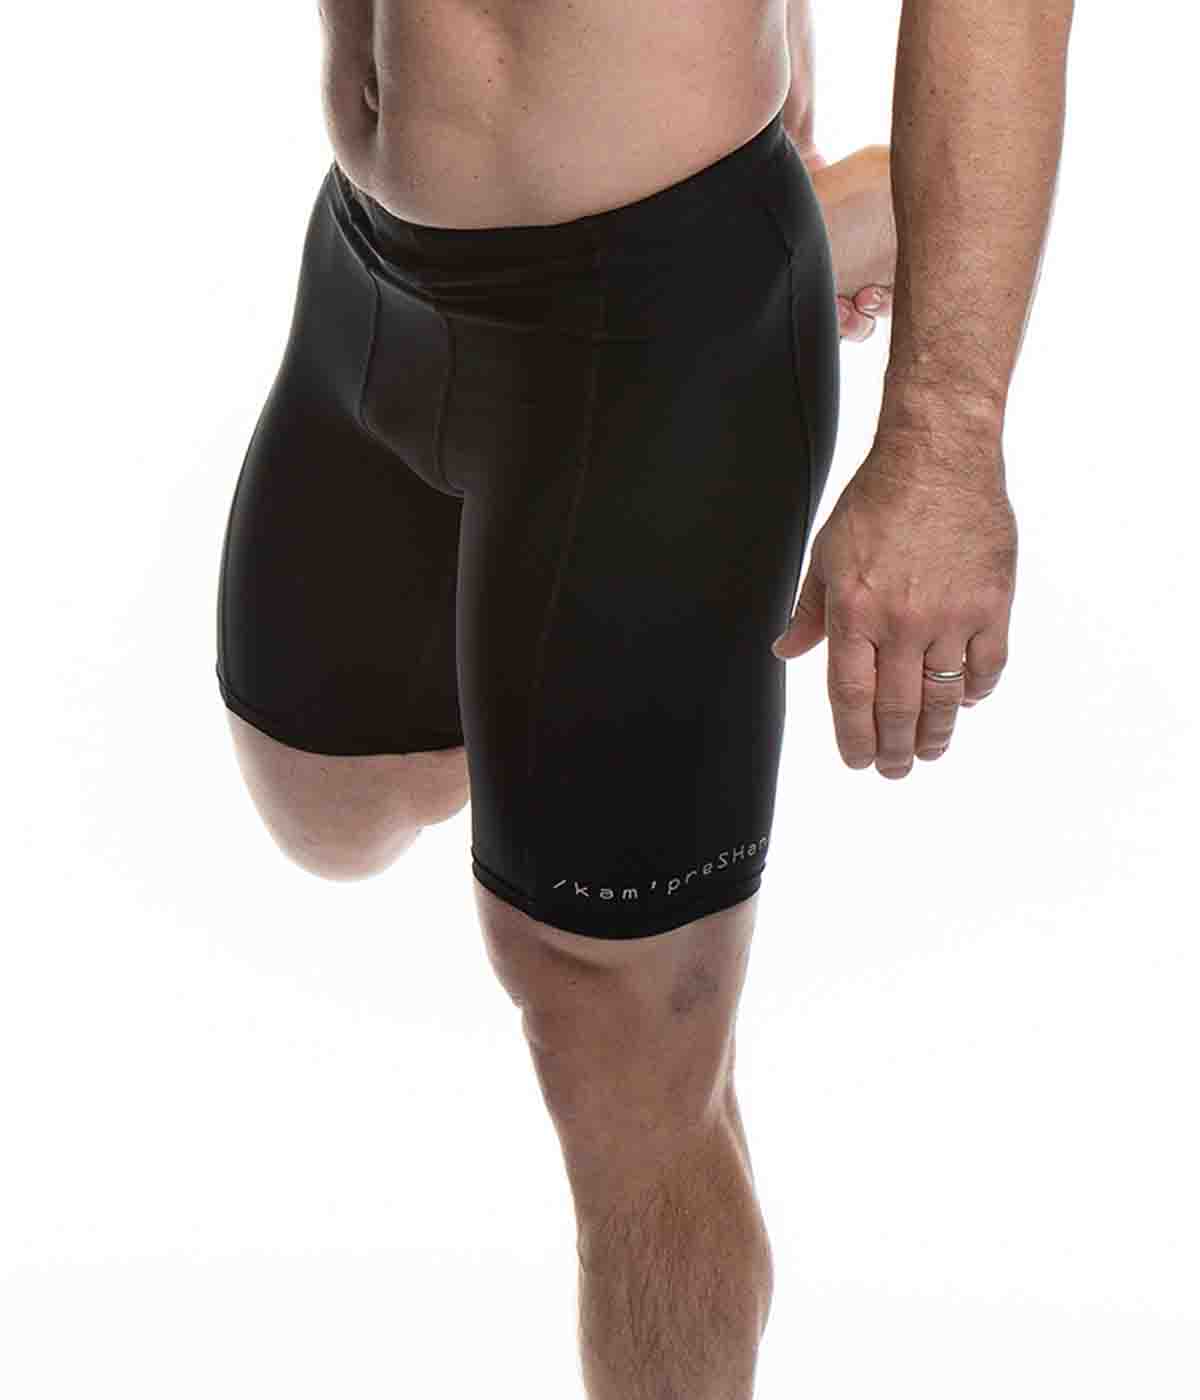 Kempreshen high quality compression shorts and sleeves for fitness support and muscle protection